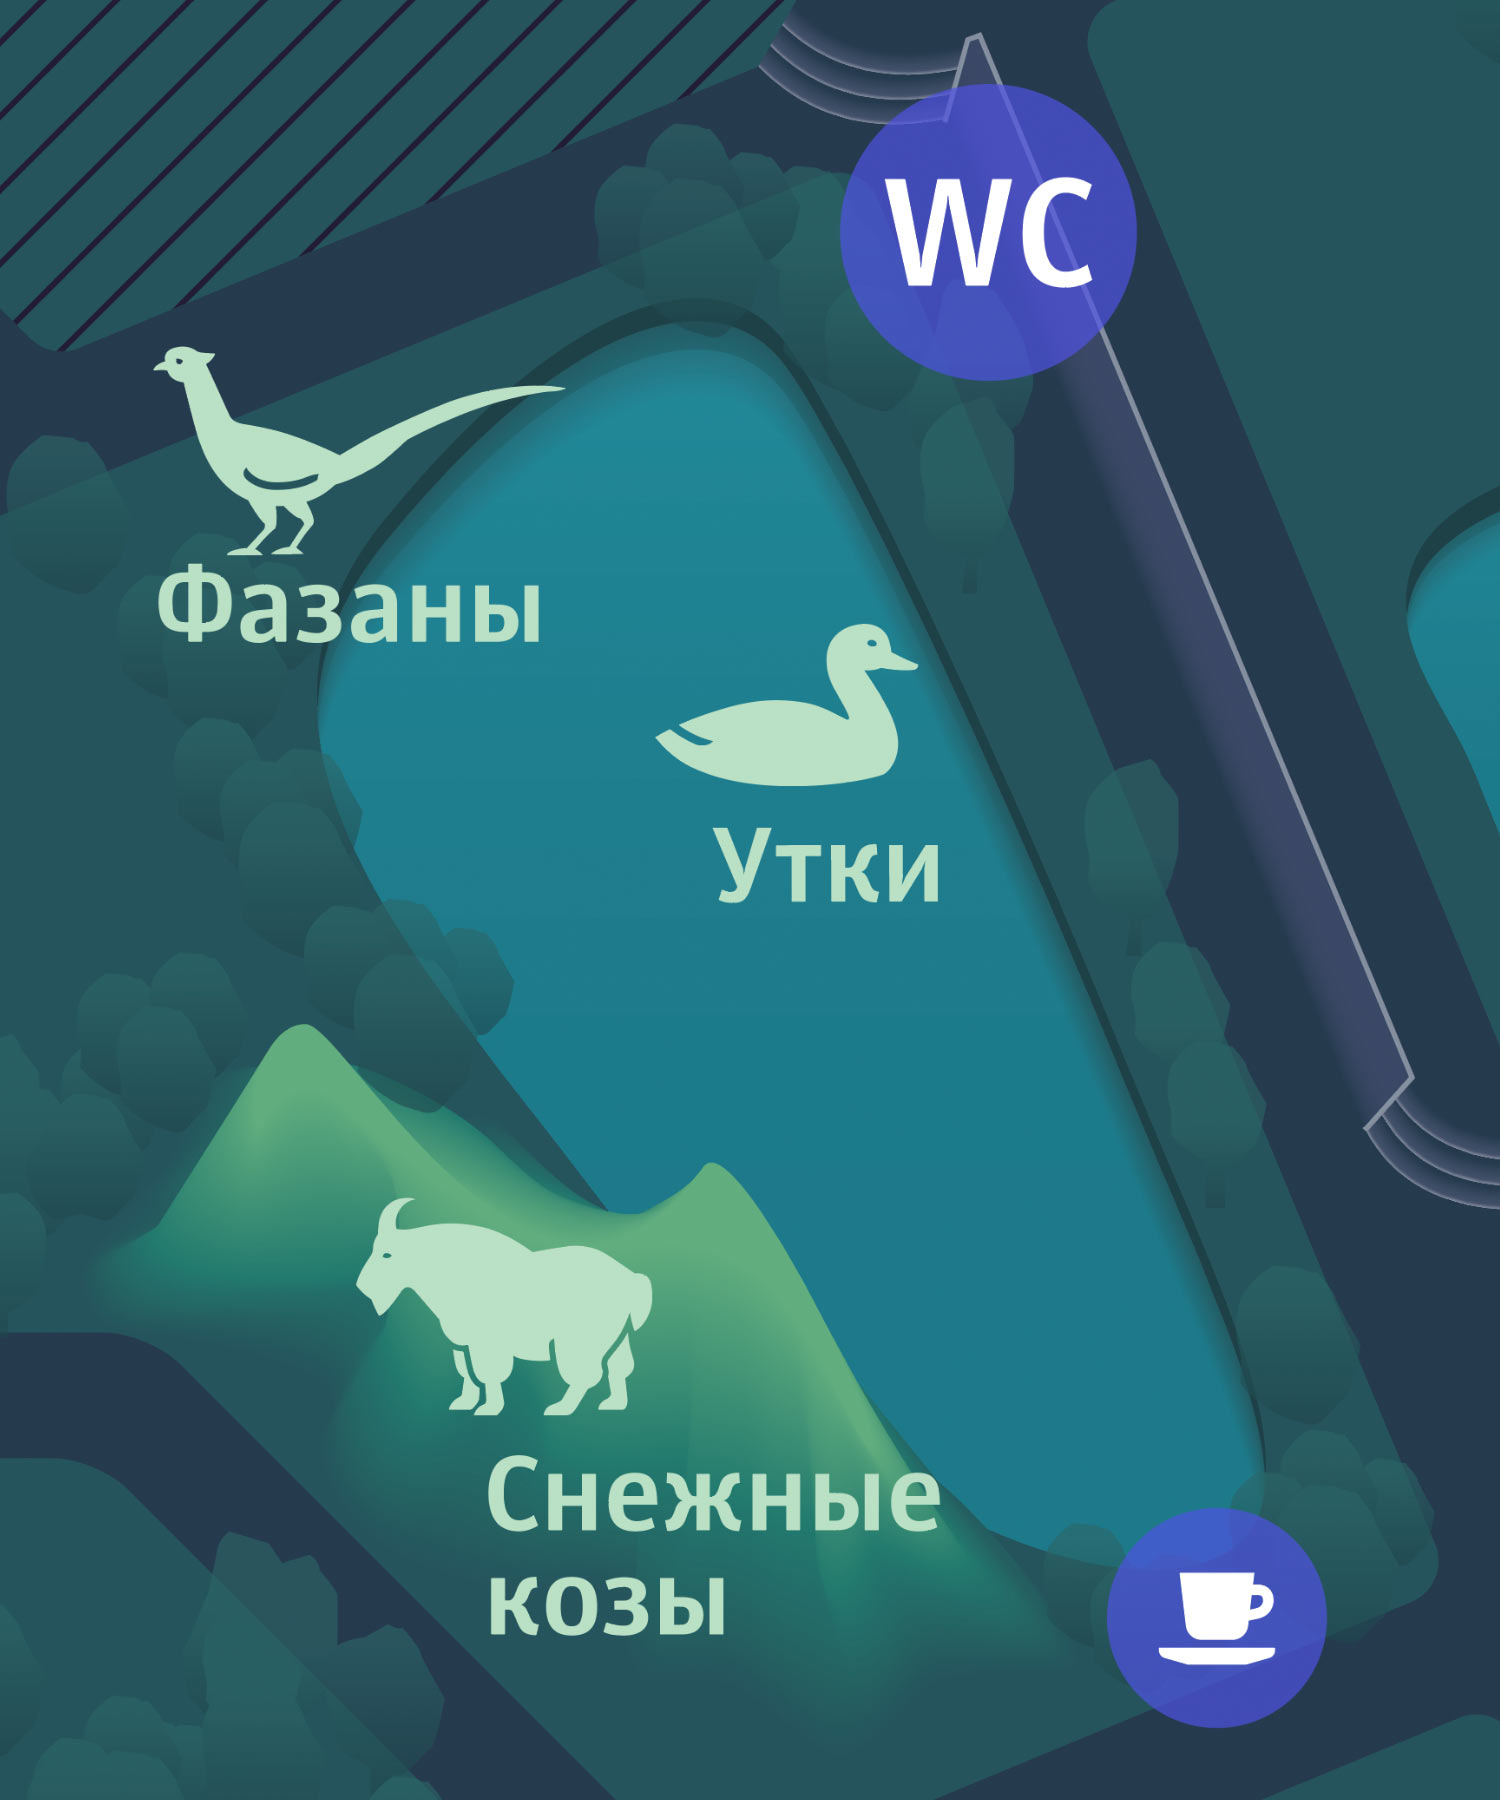 moscow zoo navigation map details 02